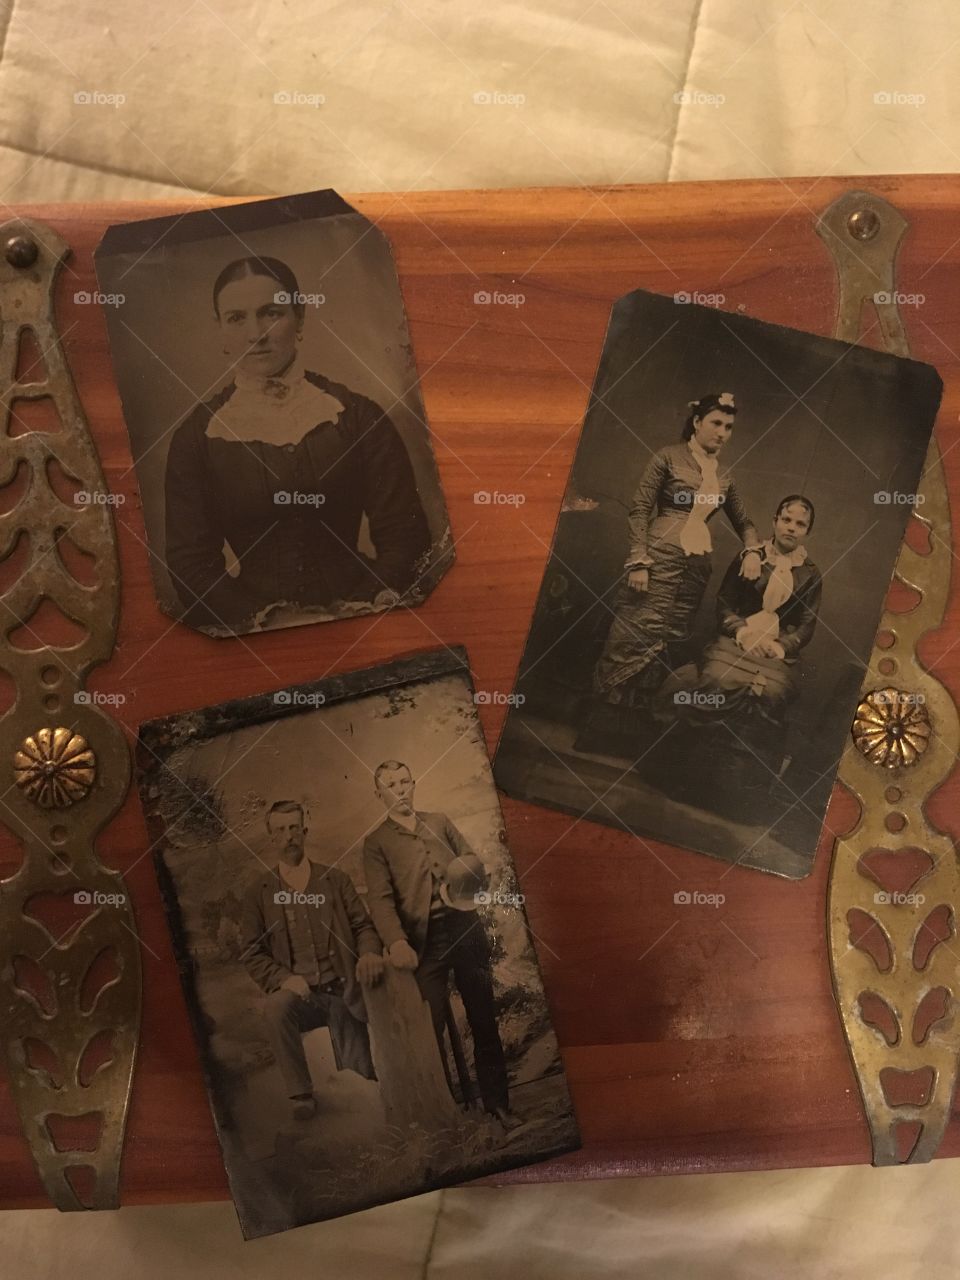 A grouping of old tin type photographs from an old estate sale. 